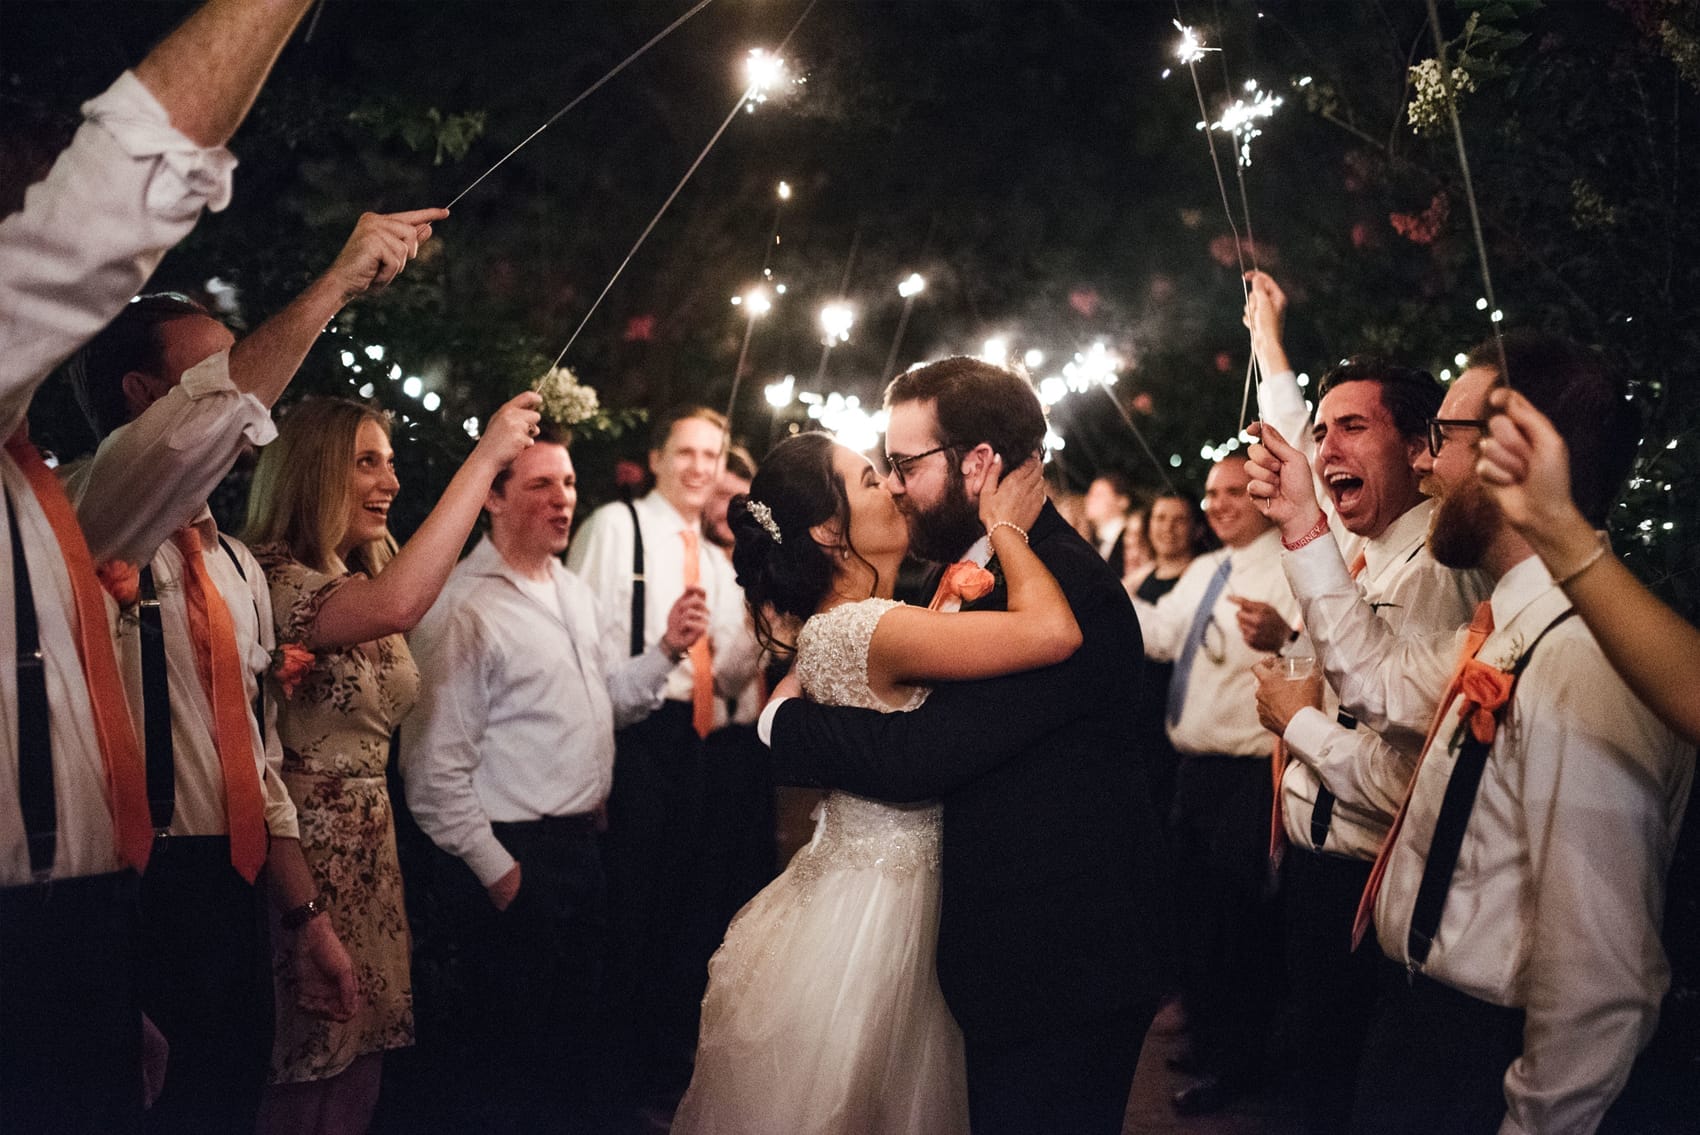 Night wedding with sparklers at stone oak ranch